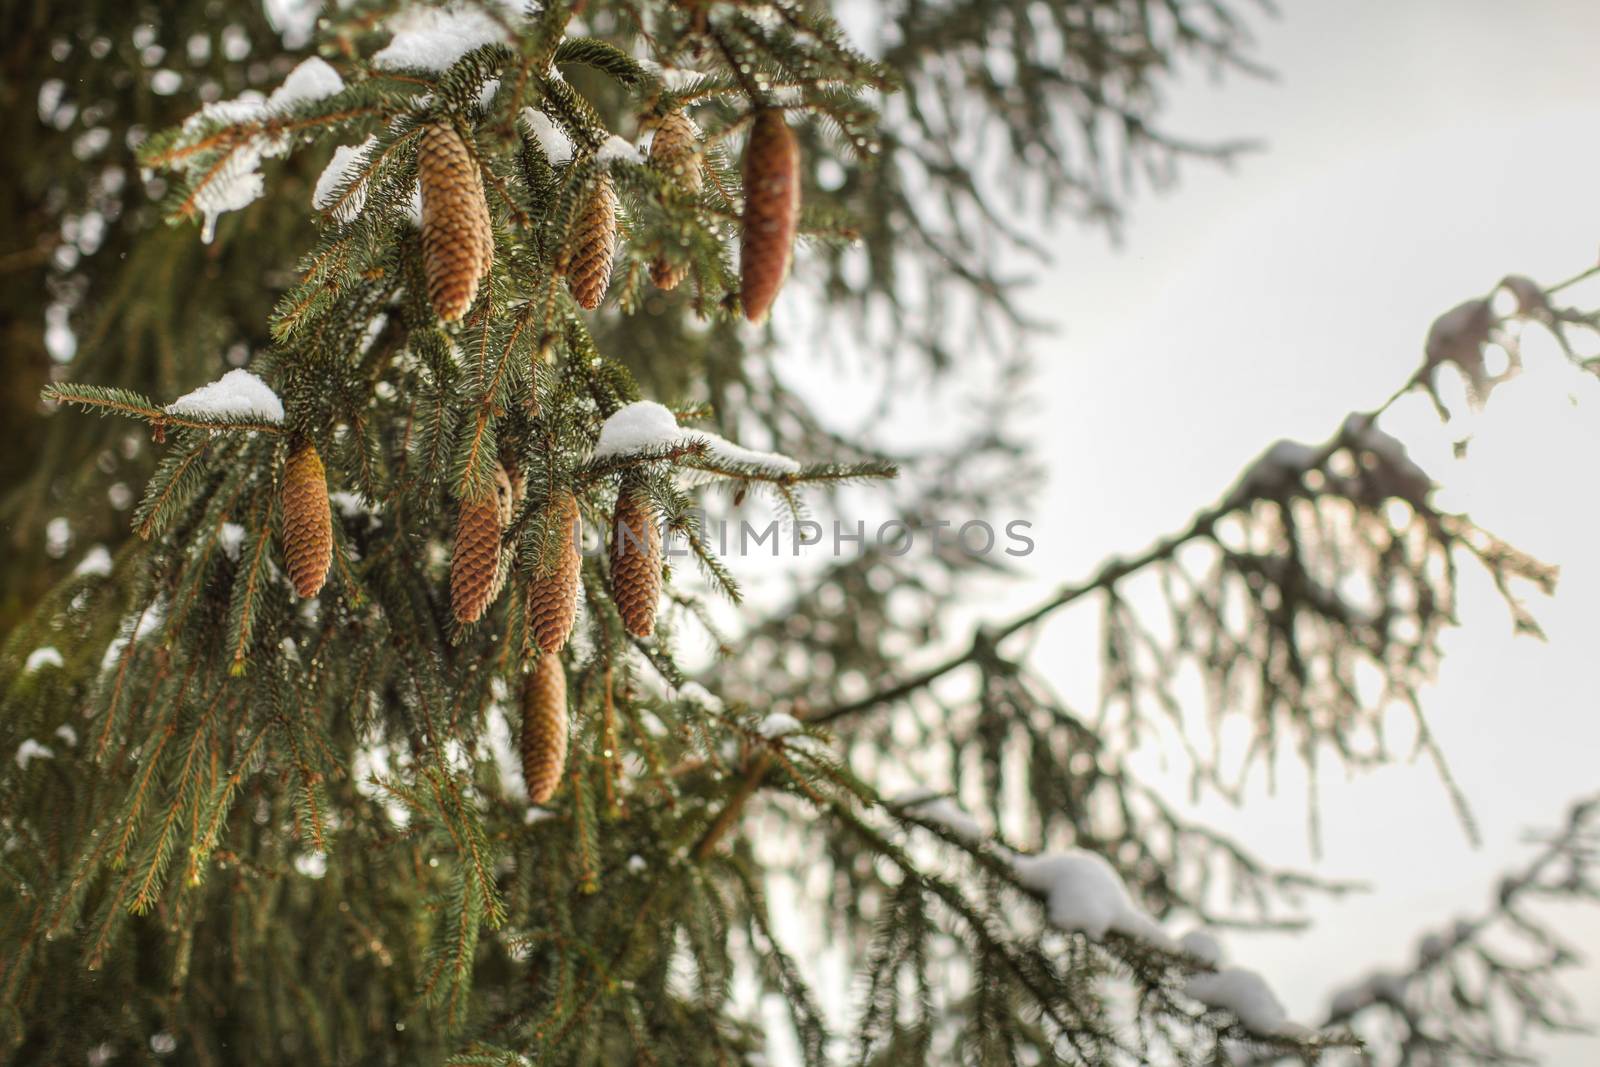 Snow melting on pines branches with coniferous cones by Ivanko